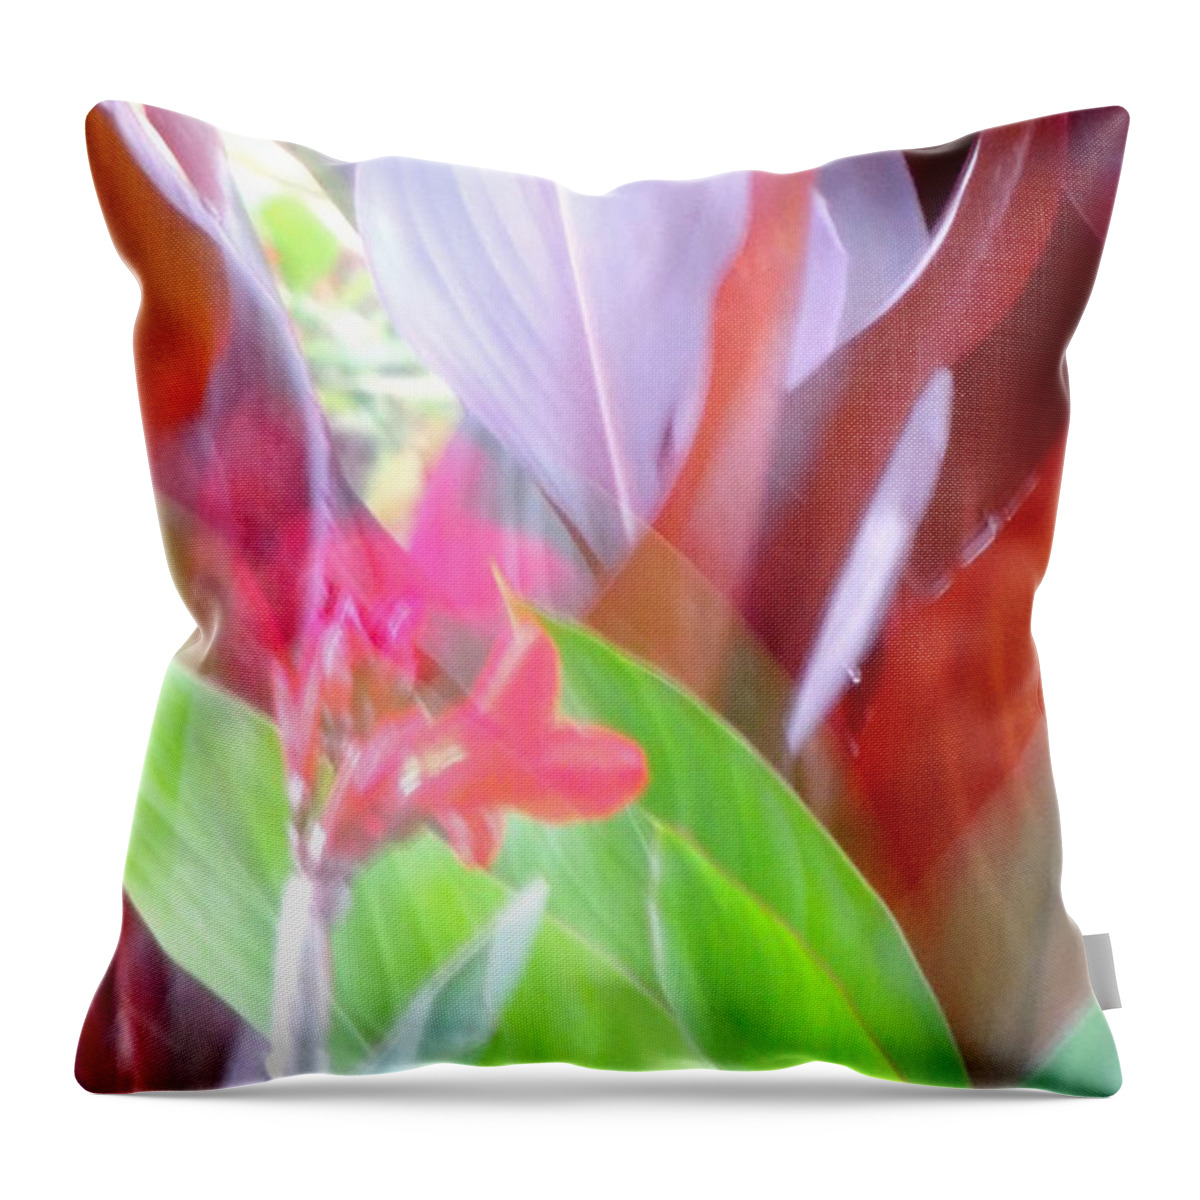  Throw Pillow featuring the painting Butchart Gadens Overexposed by Tracie L Hawkins